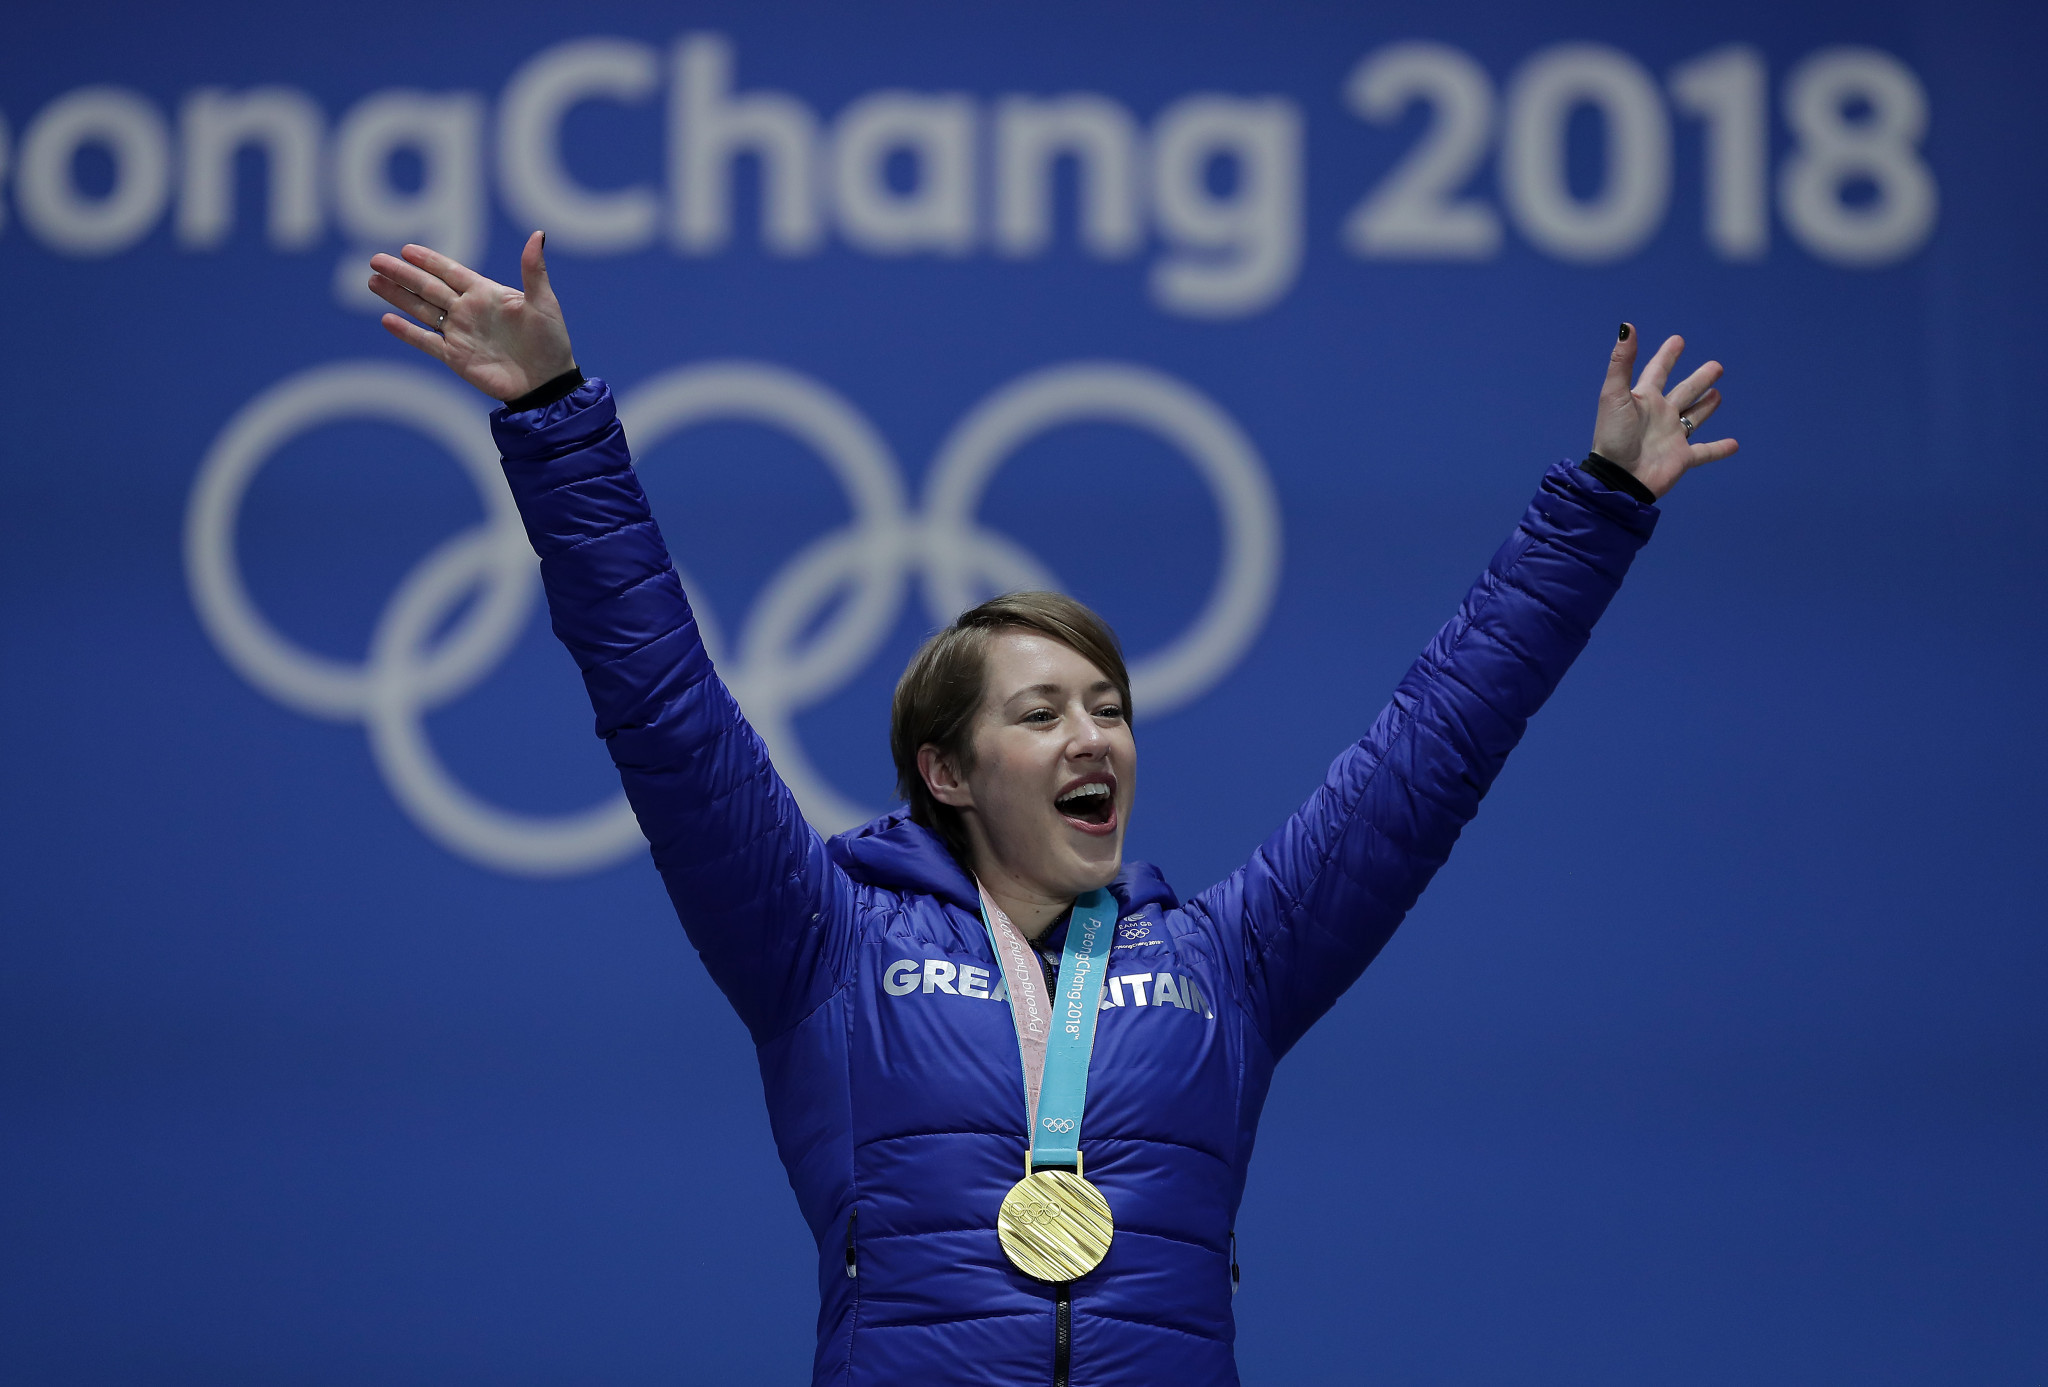 Olympic skeleton champion Yarnold undergoes knee surgery to treat genetic condition